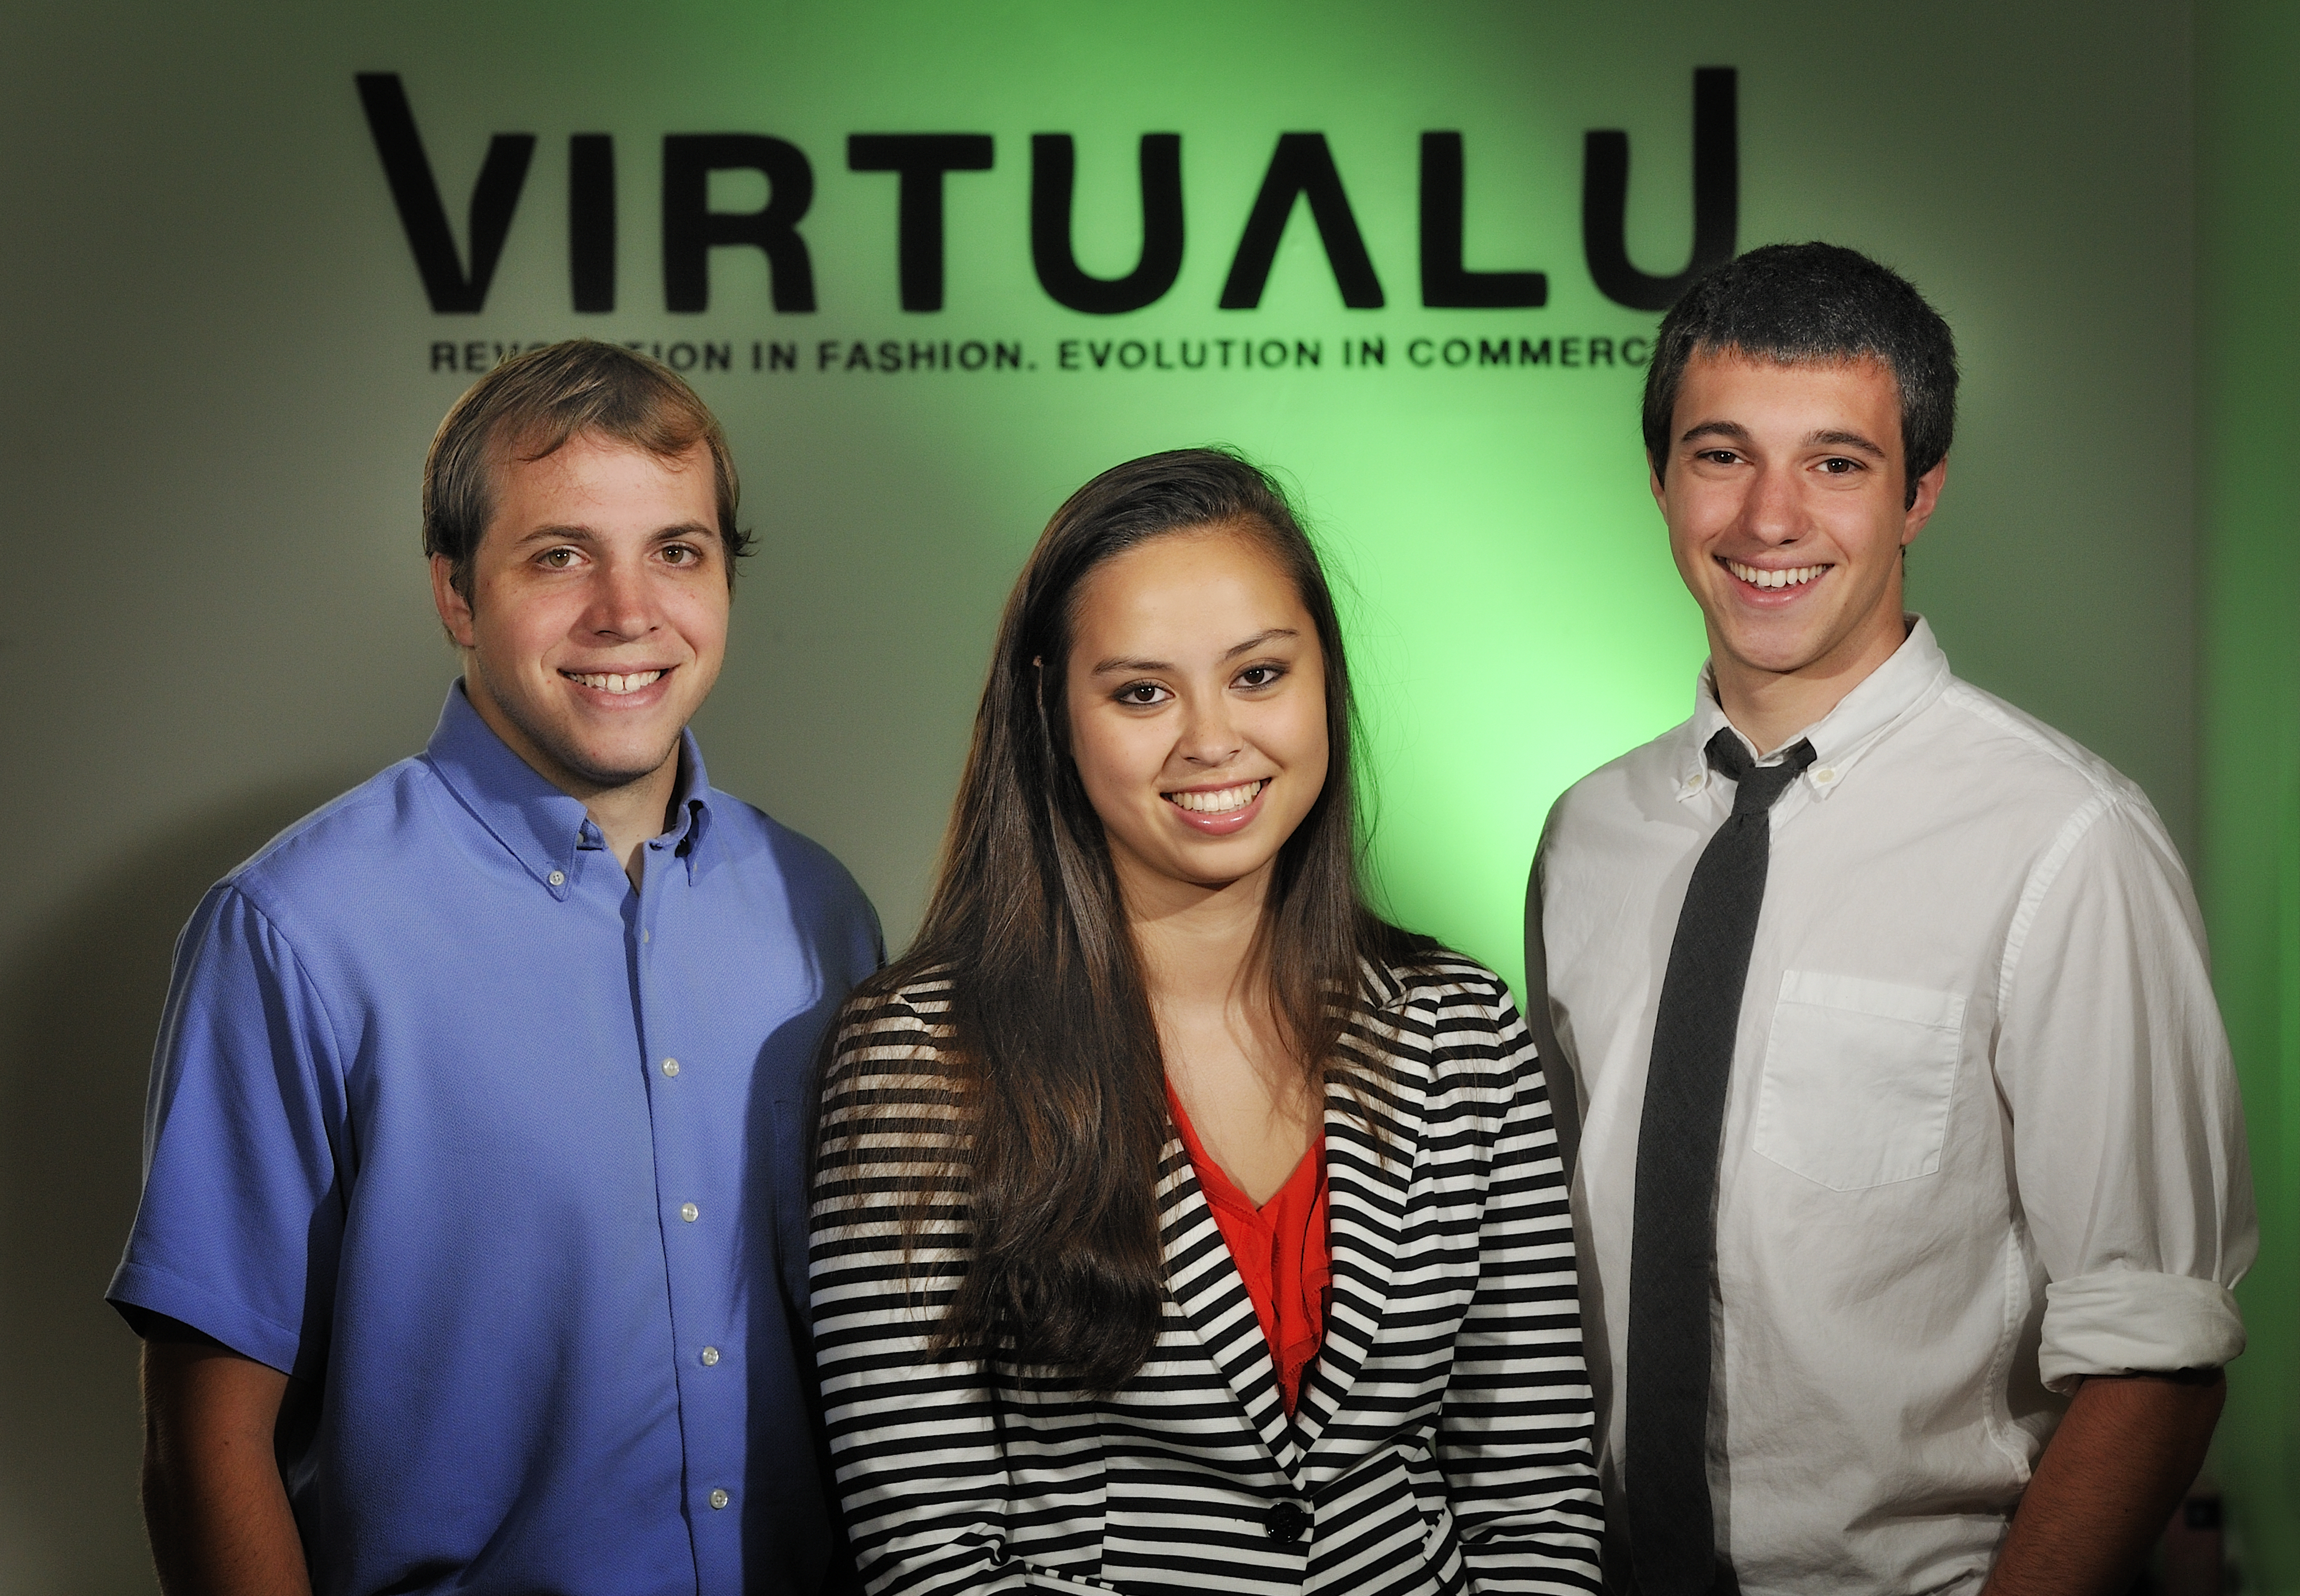 The VirtualU co-founders are (left to right) Louis Cirillo, Caroline Pugh, and Nick Gagianas.